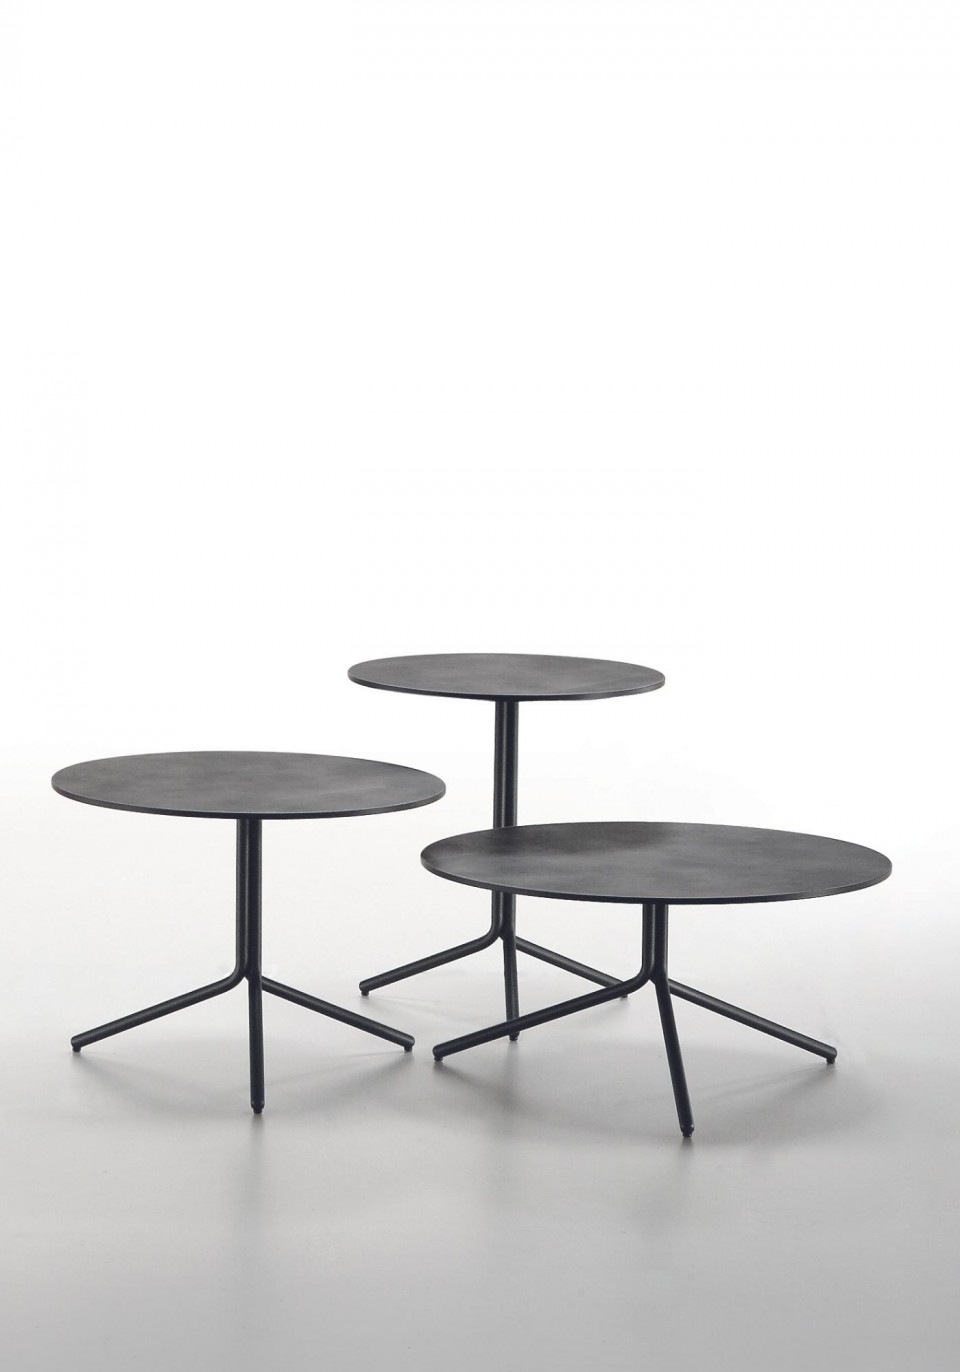 Trampoliere coffee table collection by MIDJ